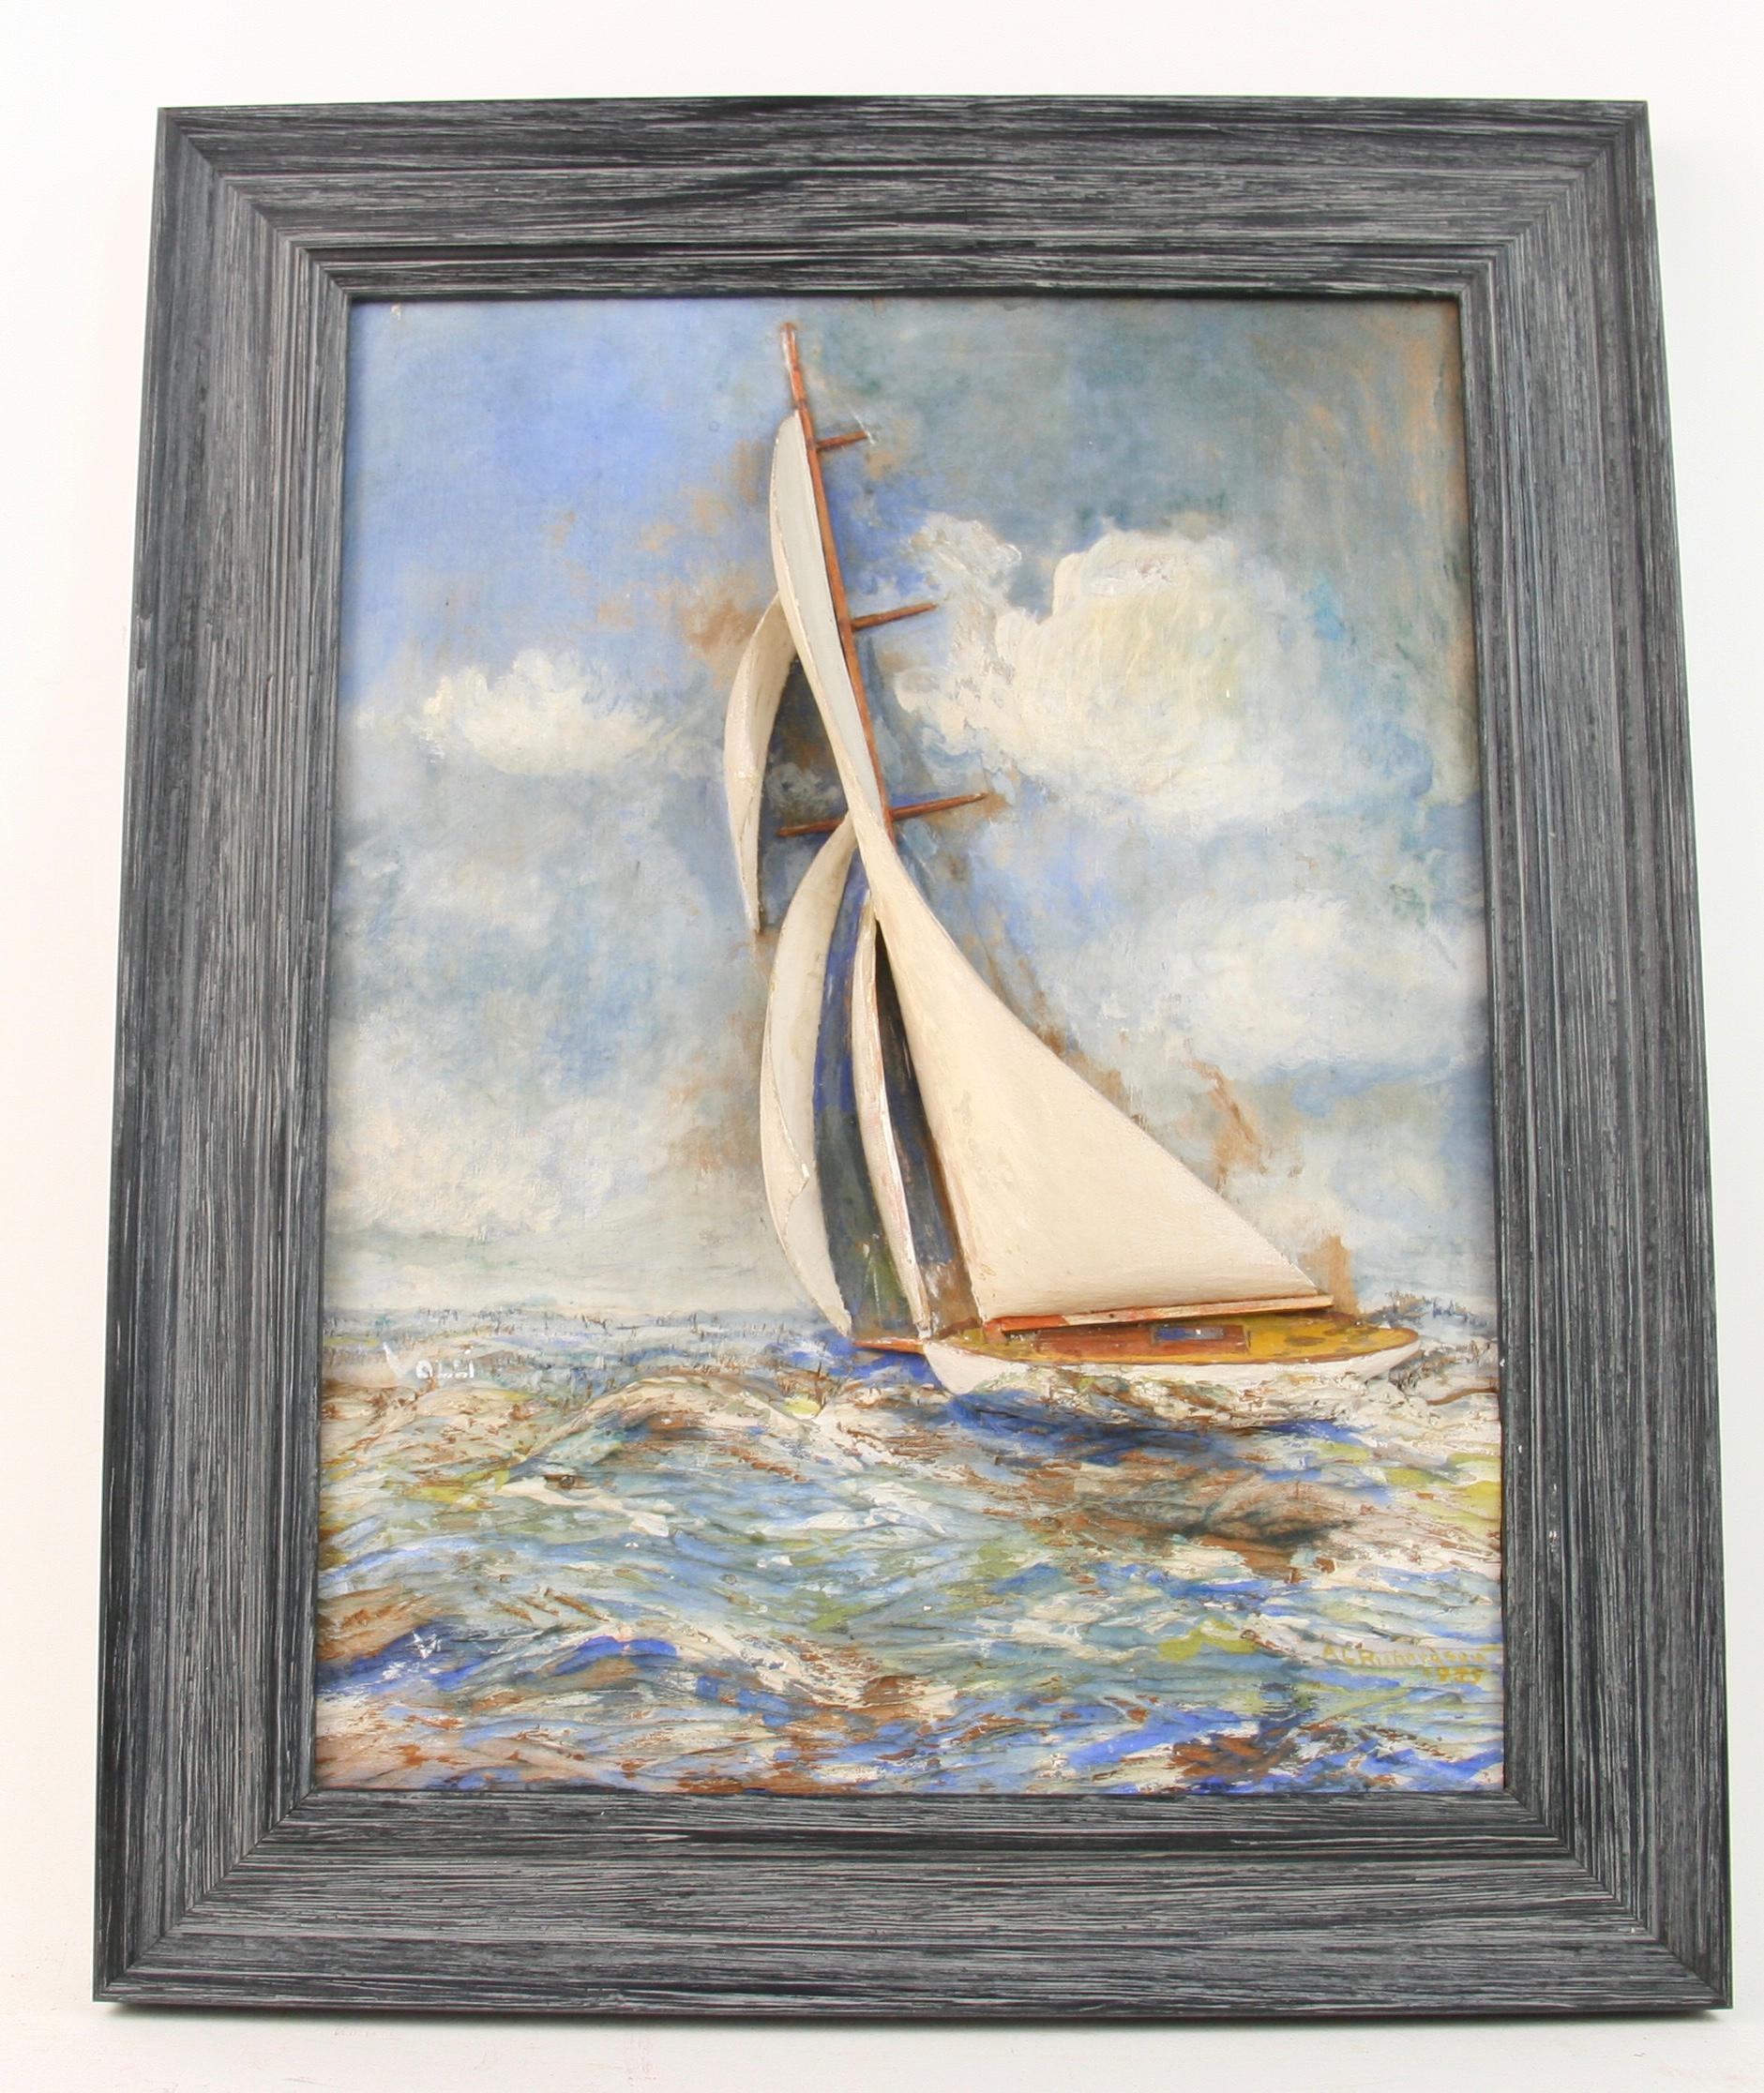 Antique   Sailing Seascape Diorama Carved Wood Sailboat  Painting